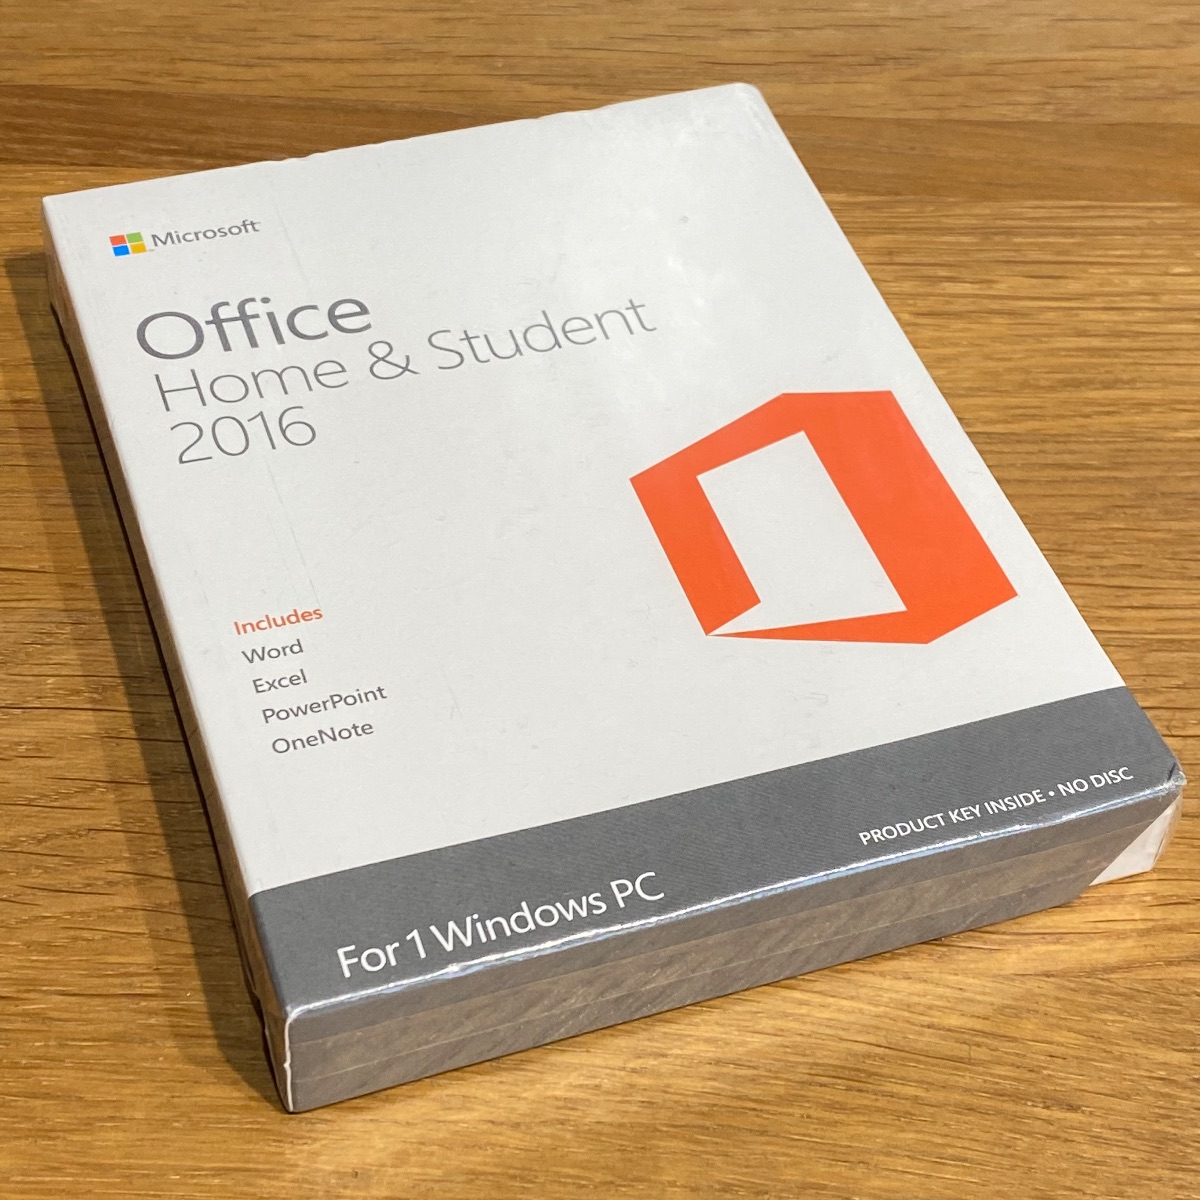 Microsoft Office 2016 Home Student Word Excel PowerPoint Lifetime 365 New Sealed 79G-04369 885370989076 (Brand New)